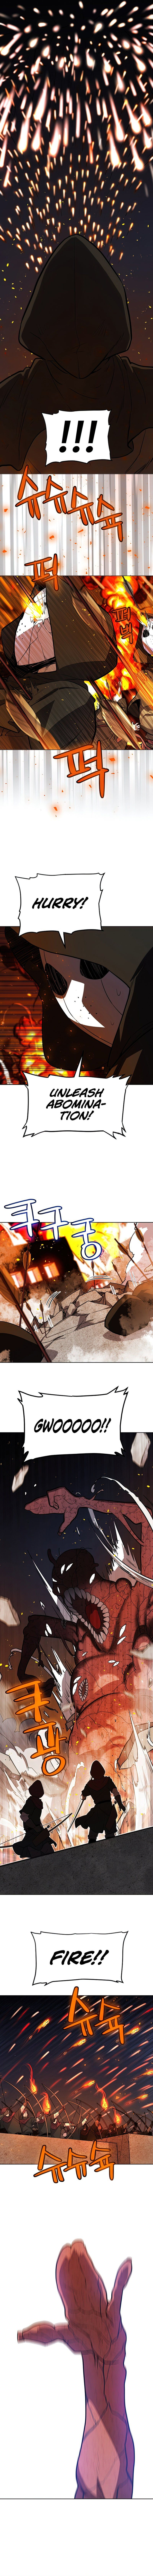 Overpowered Sword chapter 32